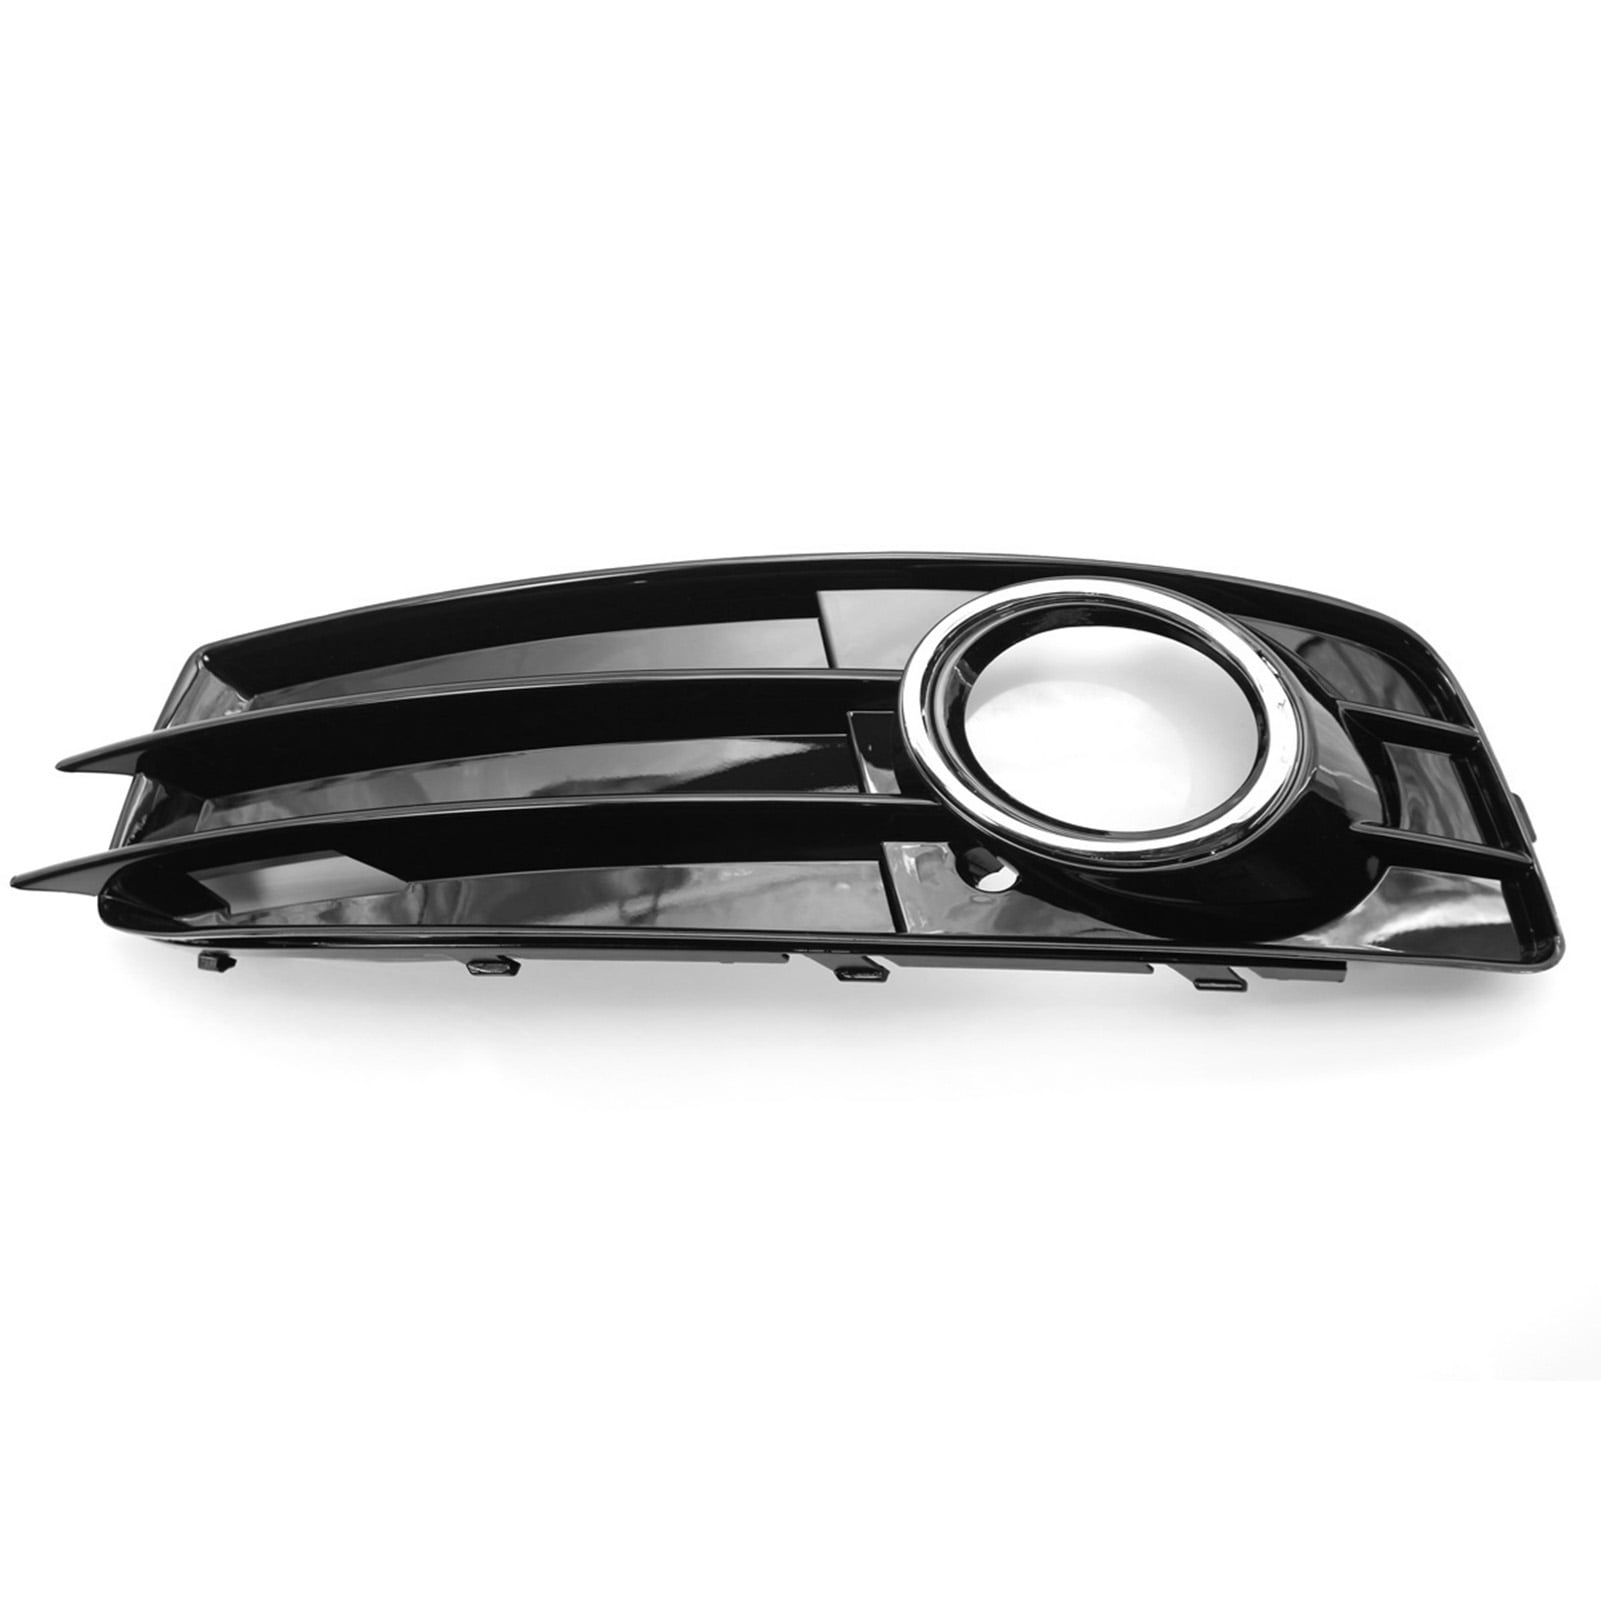 Right Side Front Fog Light Grille Cover With Hole Chrome Grill For Mazda 3 14-16 